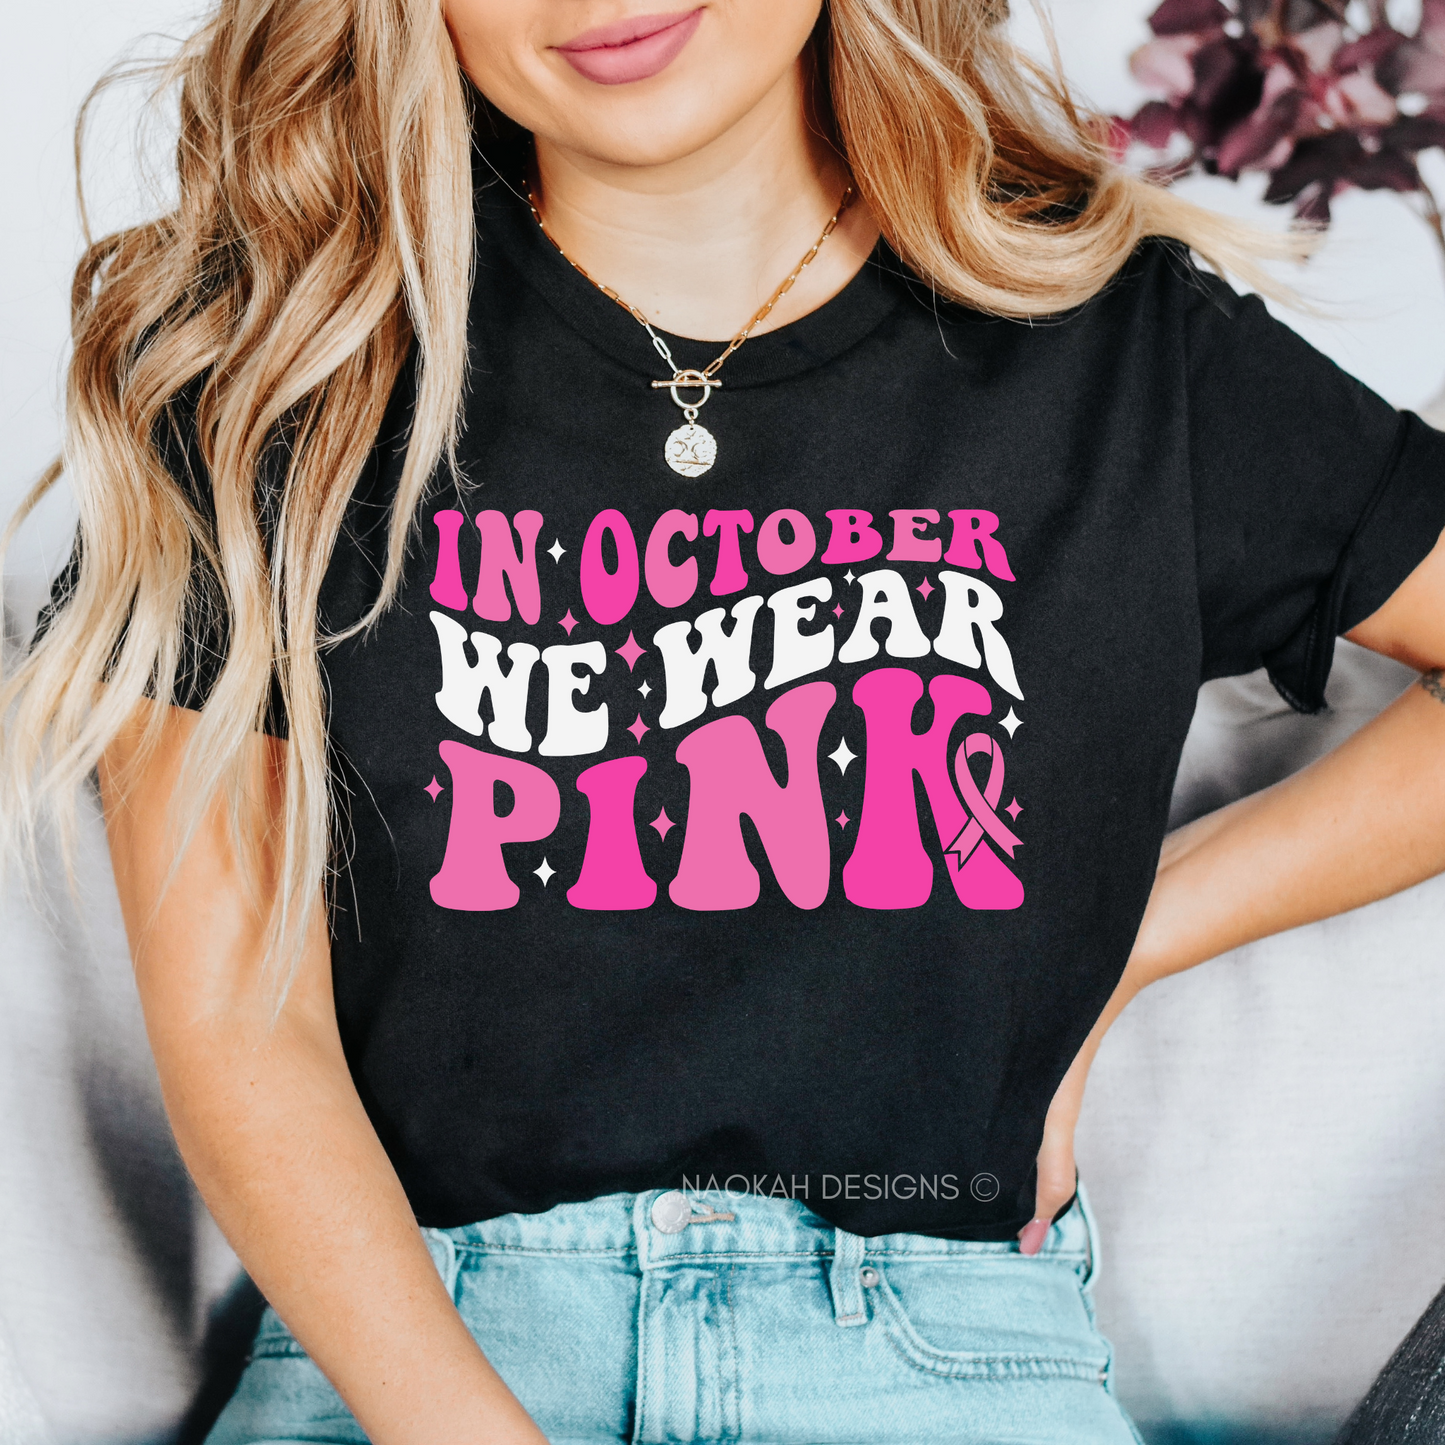 looking for a stylish way to show your support? look no further! our "in october we wear pink" black t-shirt is the perfect choice for anyone who loves complimenting and supporting others. with its retro-inspired design, this shirt not only helps spread awareness for breast cancer awareness month but also makes a bold fashion statement. made with high-quality materials, it offers both comfort and durability. join the movement and wear your support proudly with this must-have t-shirt.